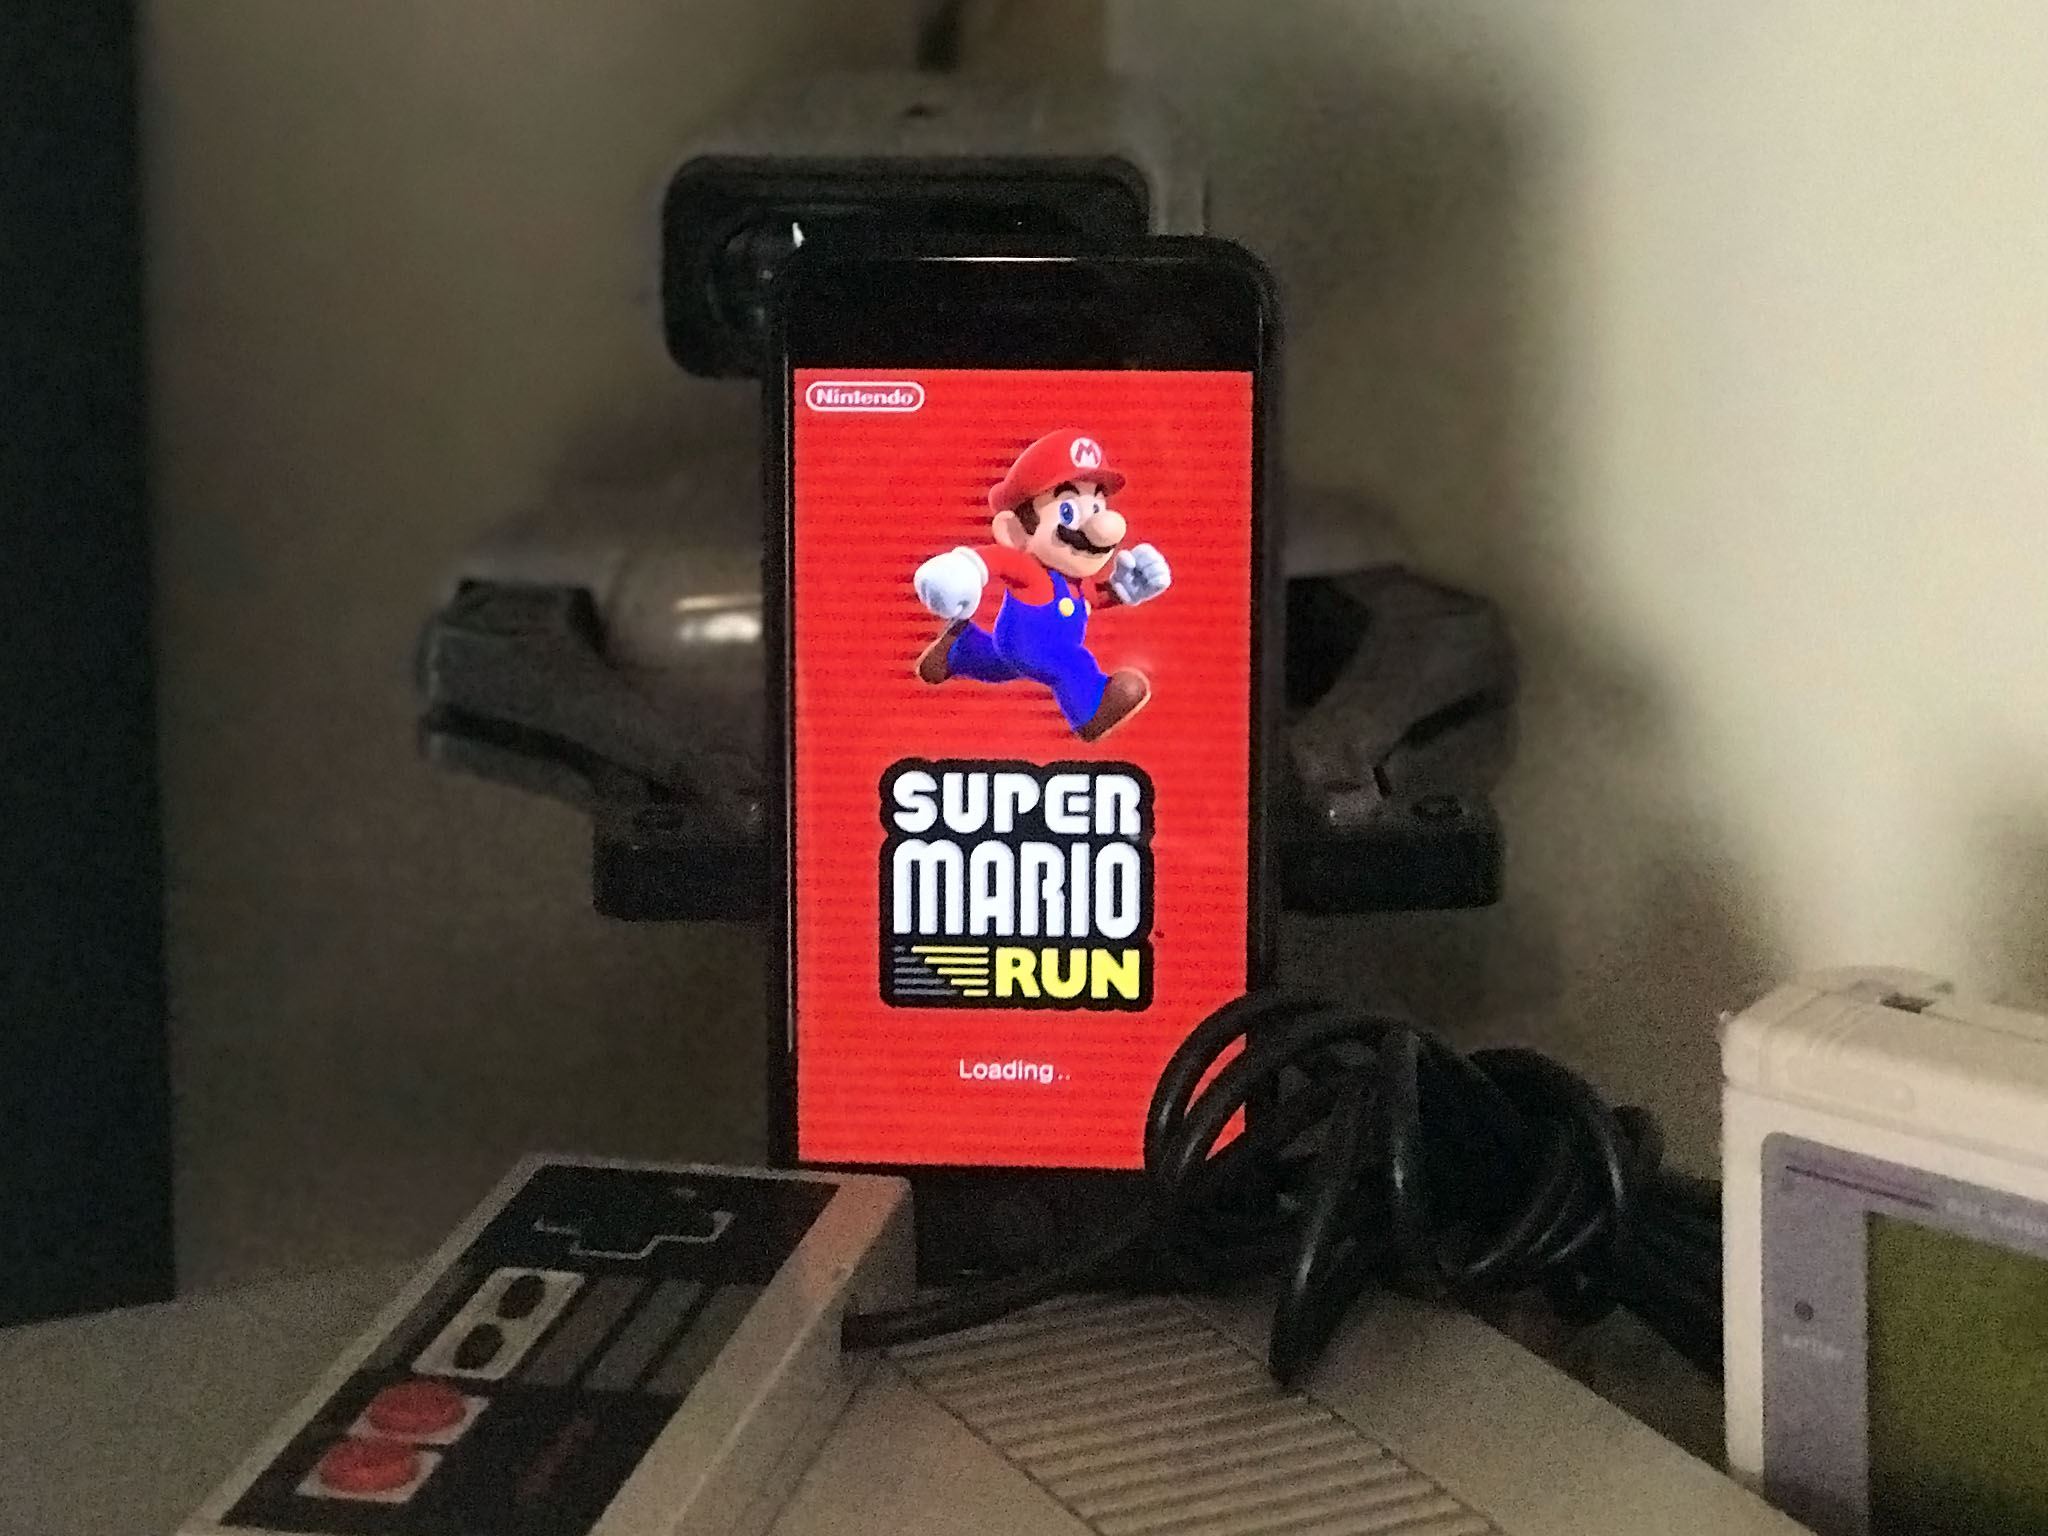 Super Mario Run Races to Android, Launches in March